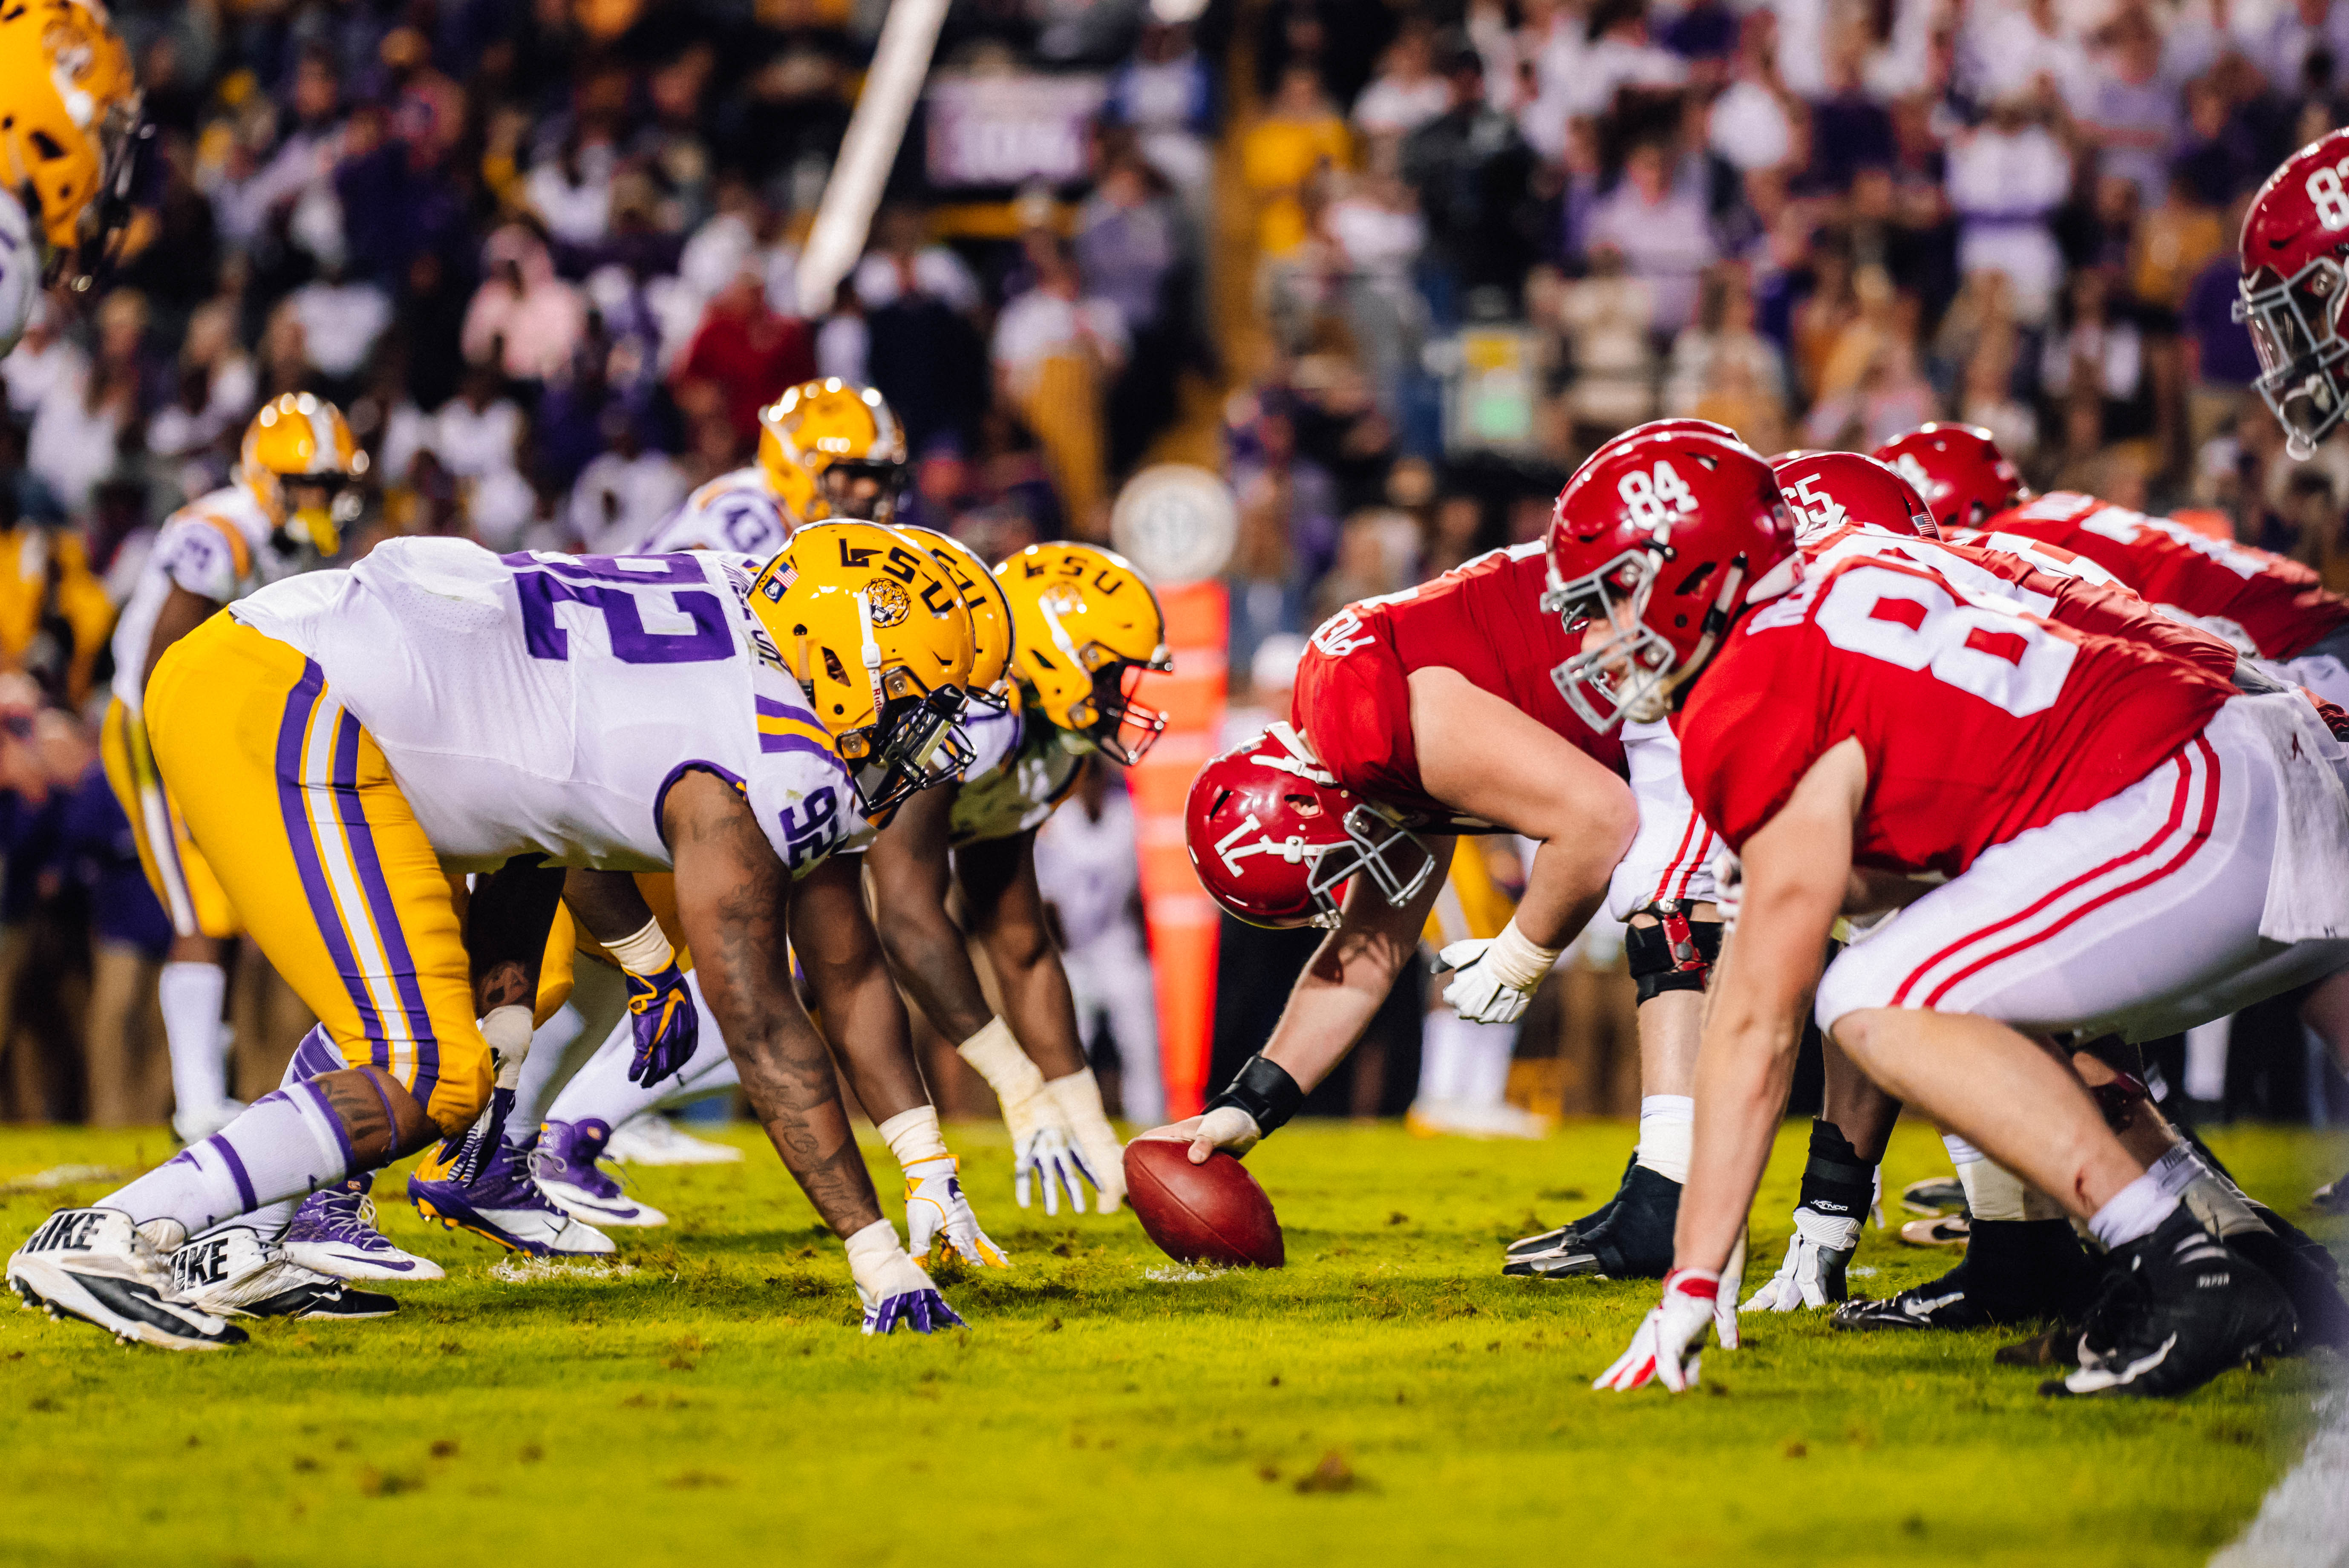 Baton Rouge bars and restaurants to watch LSU battle Alabama this weekend